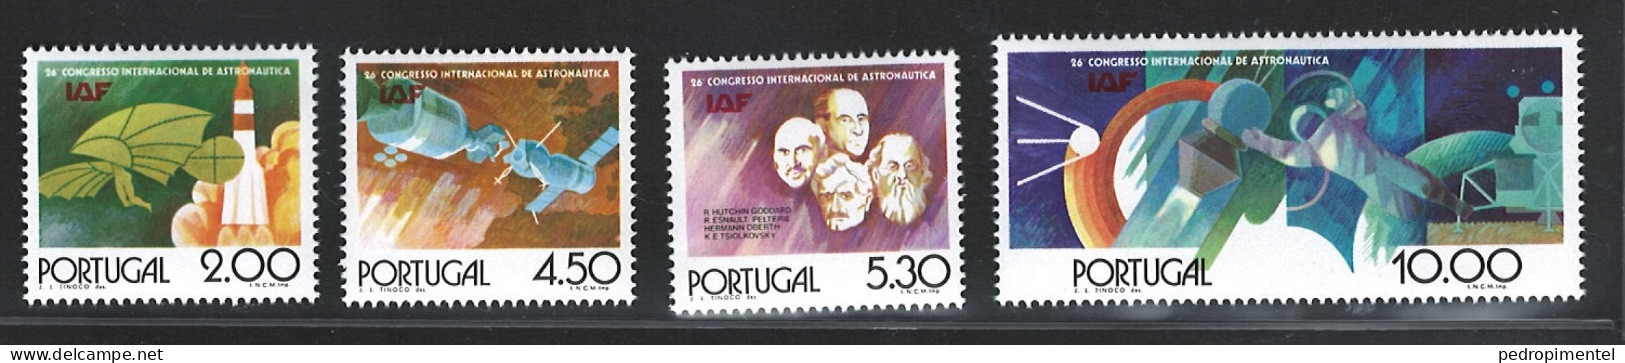 Portugal Stamps 1975 "International Astronautical Federation" Condition MNH #1261-1264 - Ungebraucht